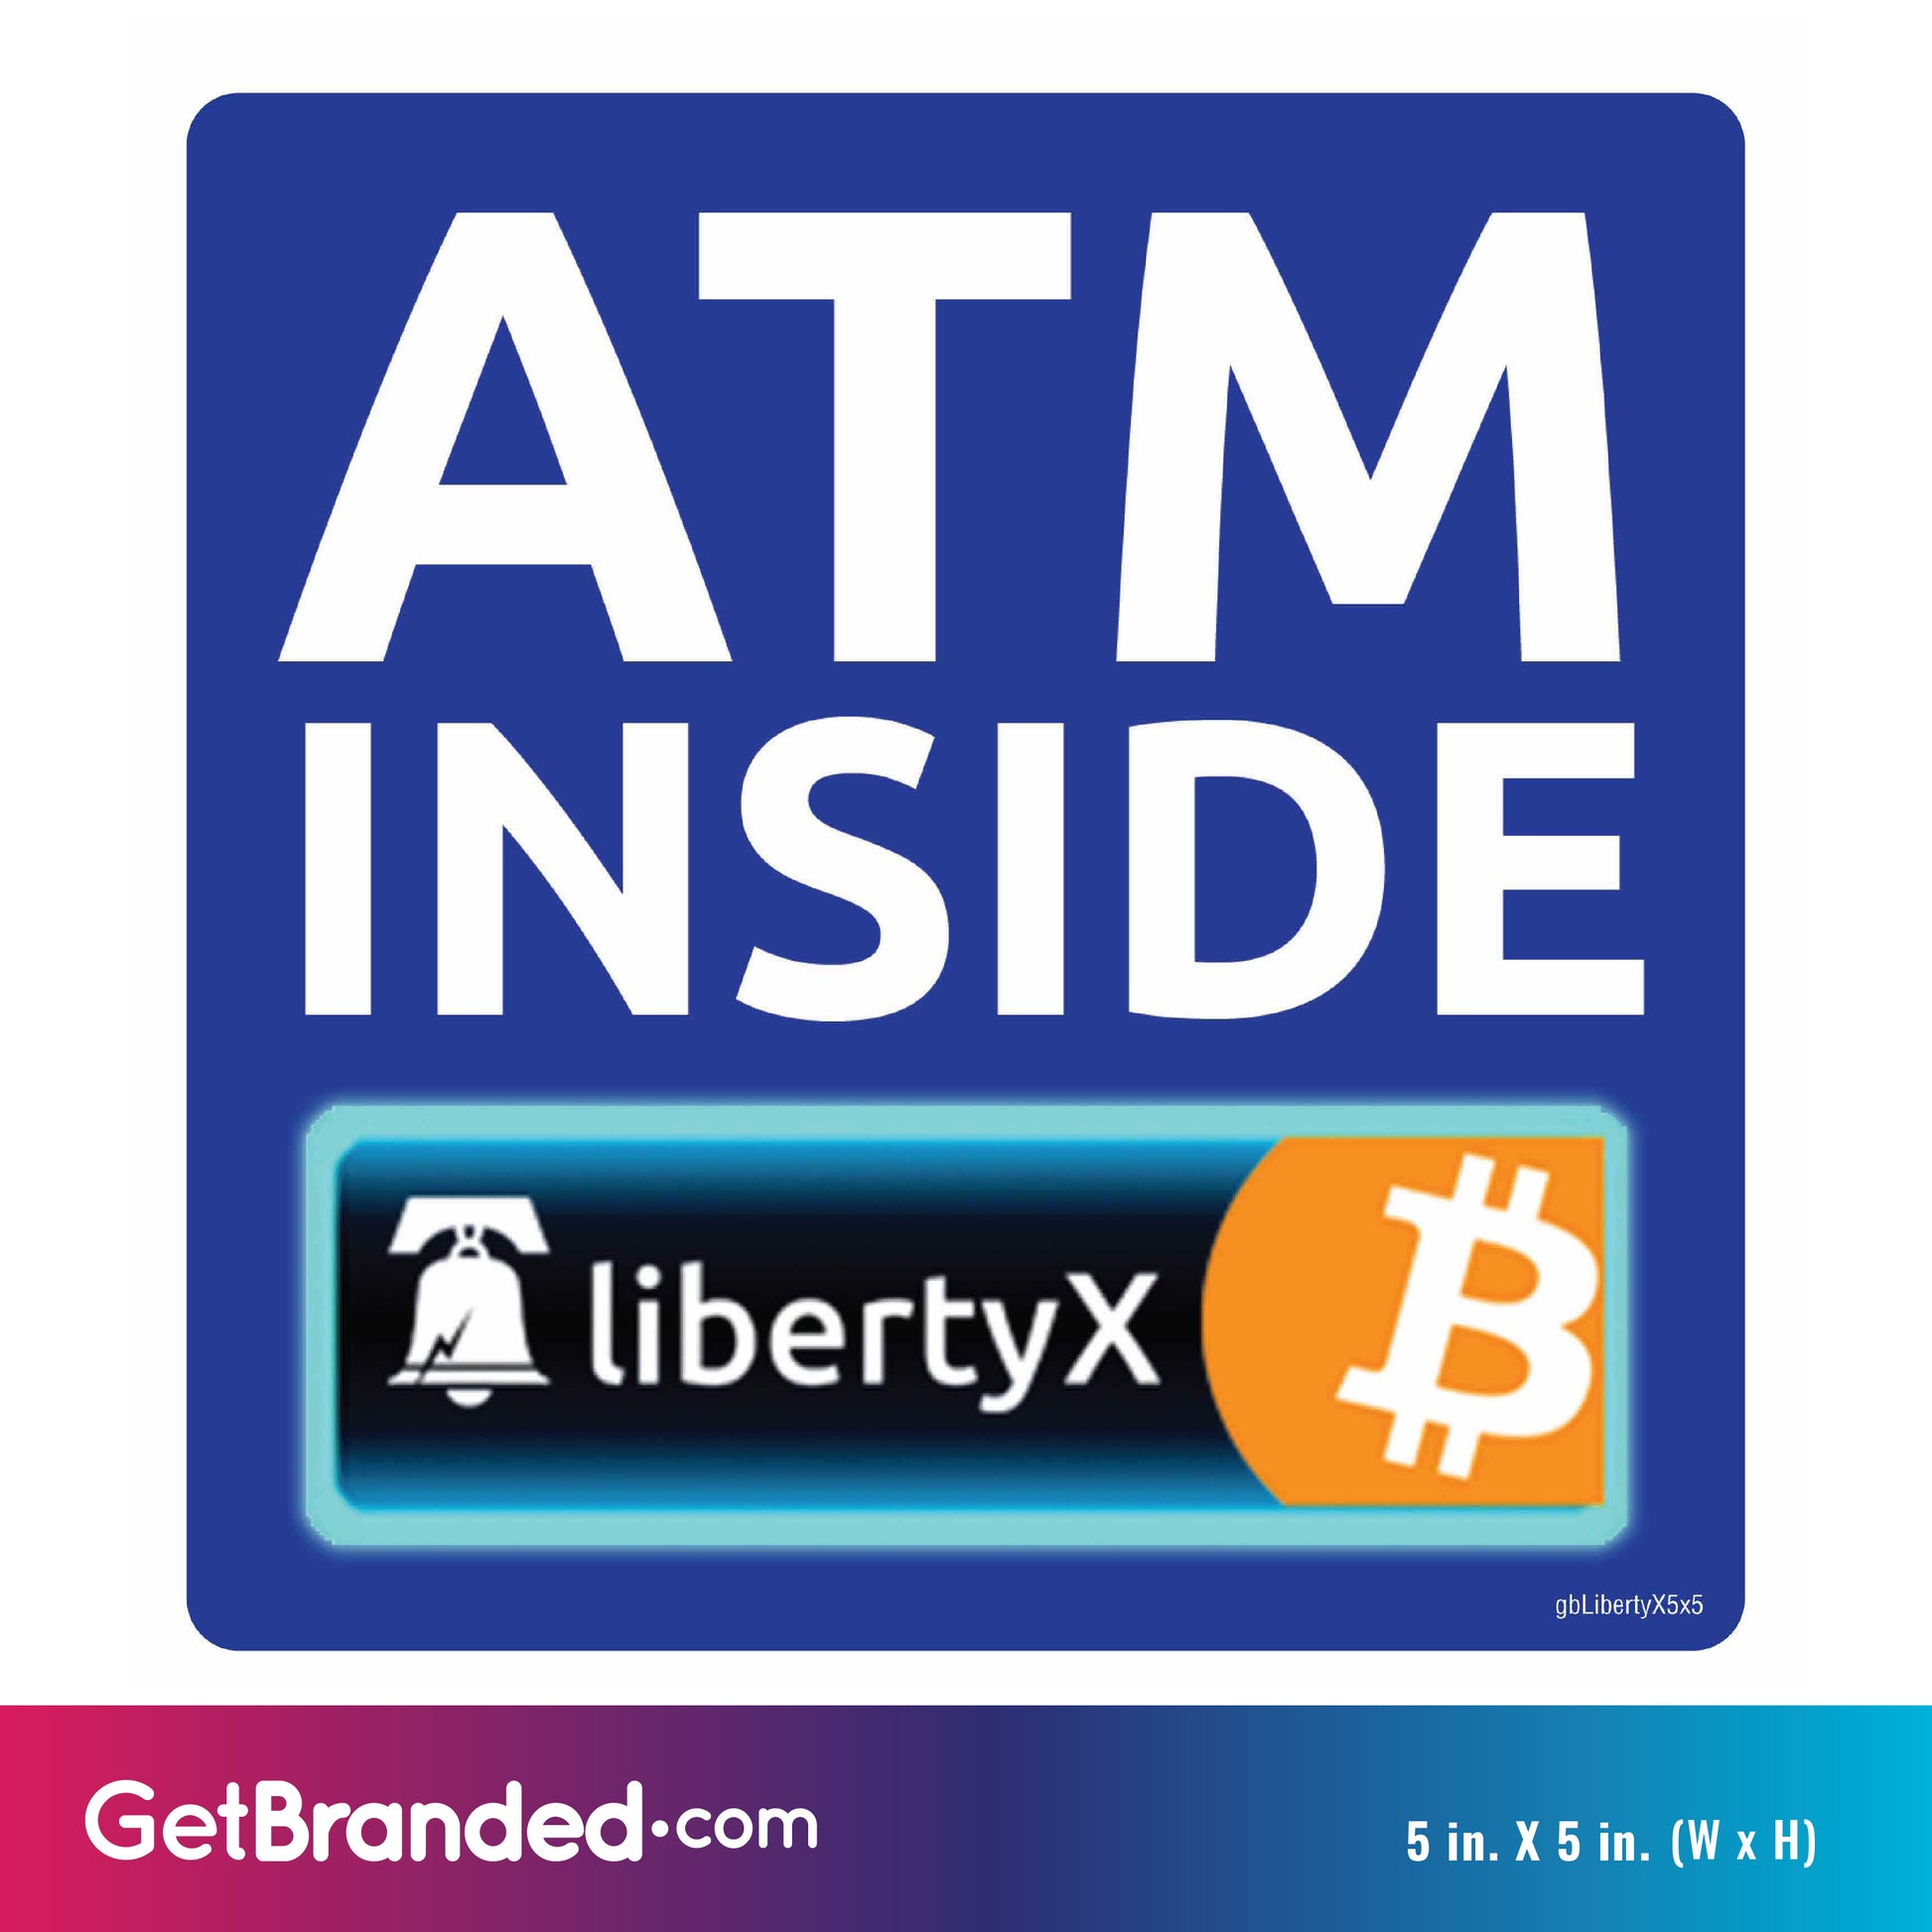 LibertyX Bitcoin ATM Inside Deca size guidel. 5 inches by 5 inches in size.